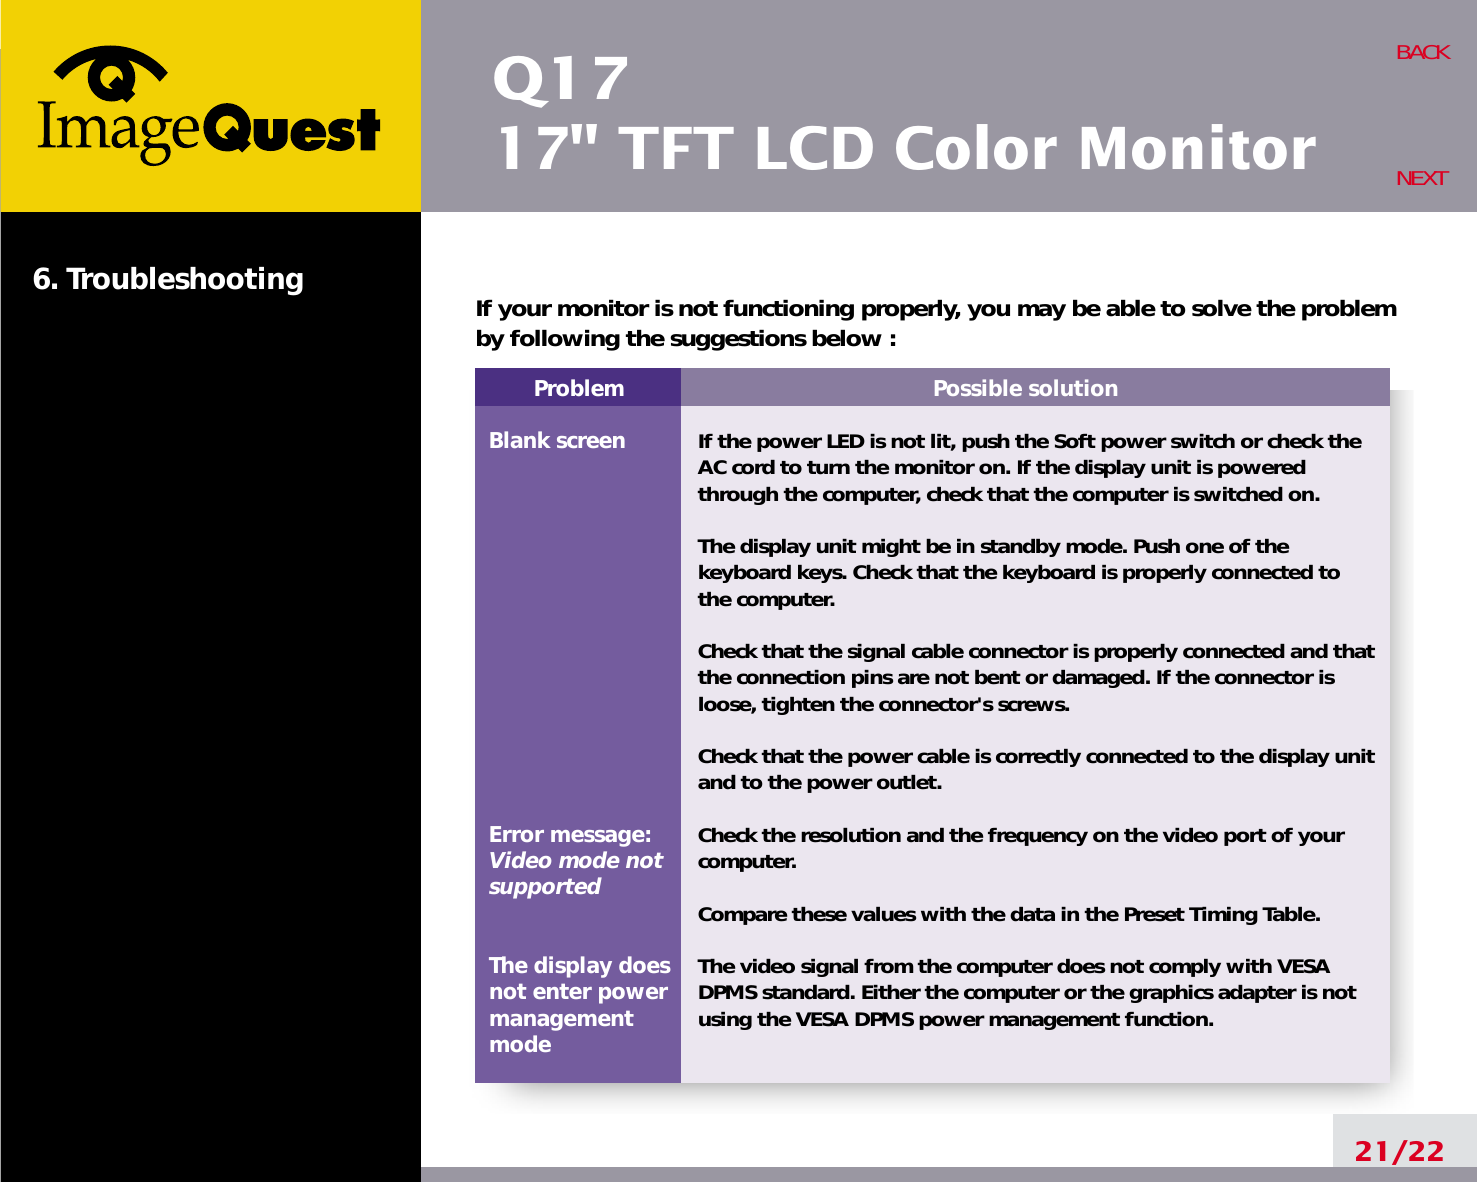 Q1717&quot; TFT LCD Color Monitor6. Troubleshooting21/22BACKNEXTProblemBlank screenError message:Video mode notsupportedThe display does not enter power managementmodePossible solutionIf the power LED is not lit, push the Soft power switch or check theAC cord to turn the monitor on. If the display unit is poweredthrough the computer, check that the computer is switched on.The display unit might be in standby mode. Push one of thekeyboard keys. Check that the keyboard is properly connected tothe computer.Check that the signal cable connector is properly connected and thatthe connection pins are not bent or damaged. If the connector isloose, tighten the connector&apos;s screws.Check that the power cable is correctly connected to the display unitand to the power outlet. Check the resolution and the frequency on the video port of yourcomputer.Compare these values with the data in the Preset Timing Table.The video signal from the computer does not comply with VESADPMS standard. Either the computer or the graphics adapter is notusing the VESA DPMS power management function.If your monitor is not functioning properly, you may be able to solve the problemby following the suggestions below :